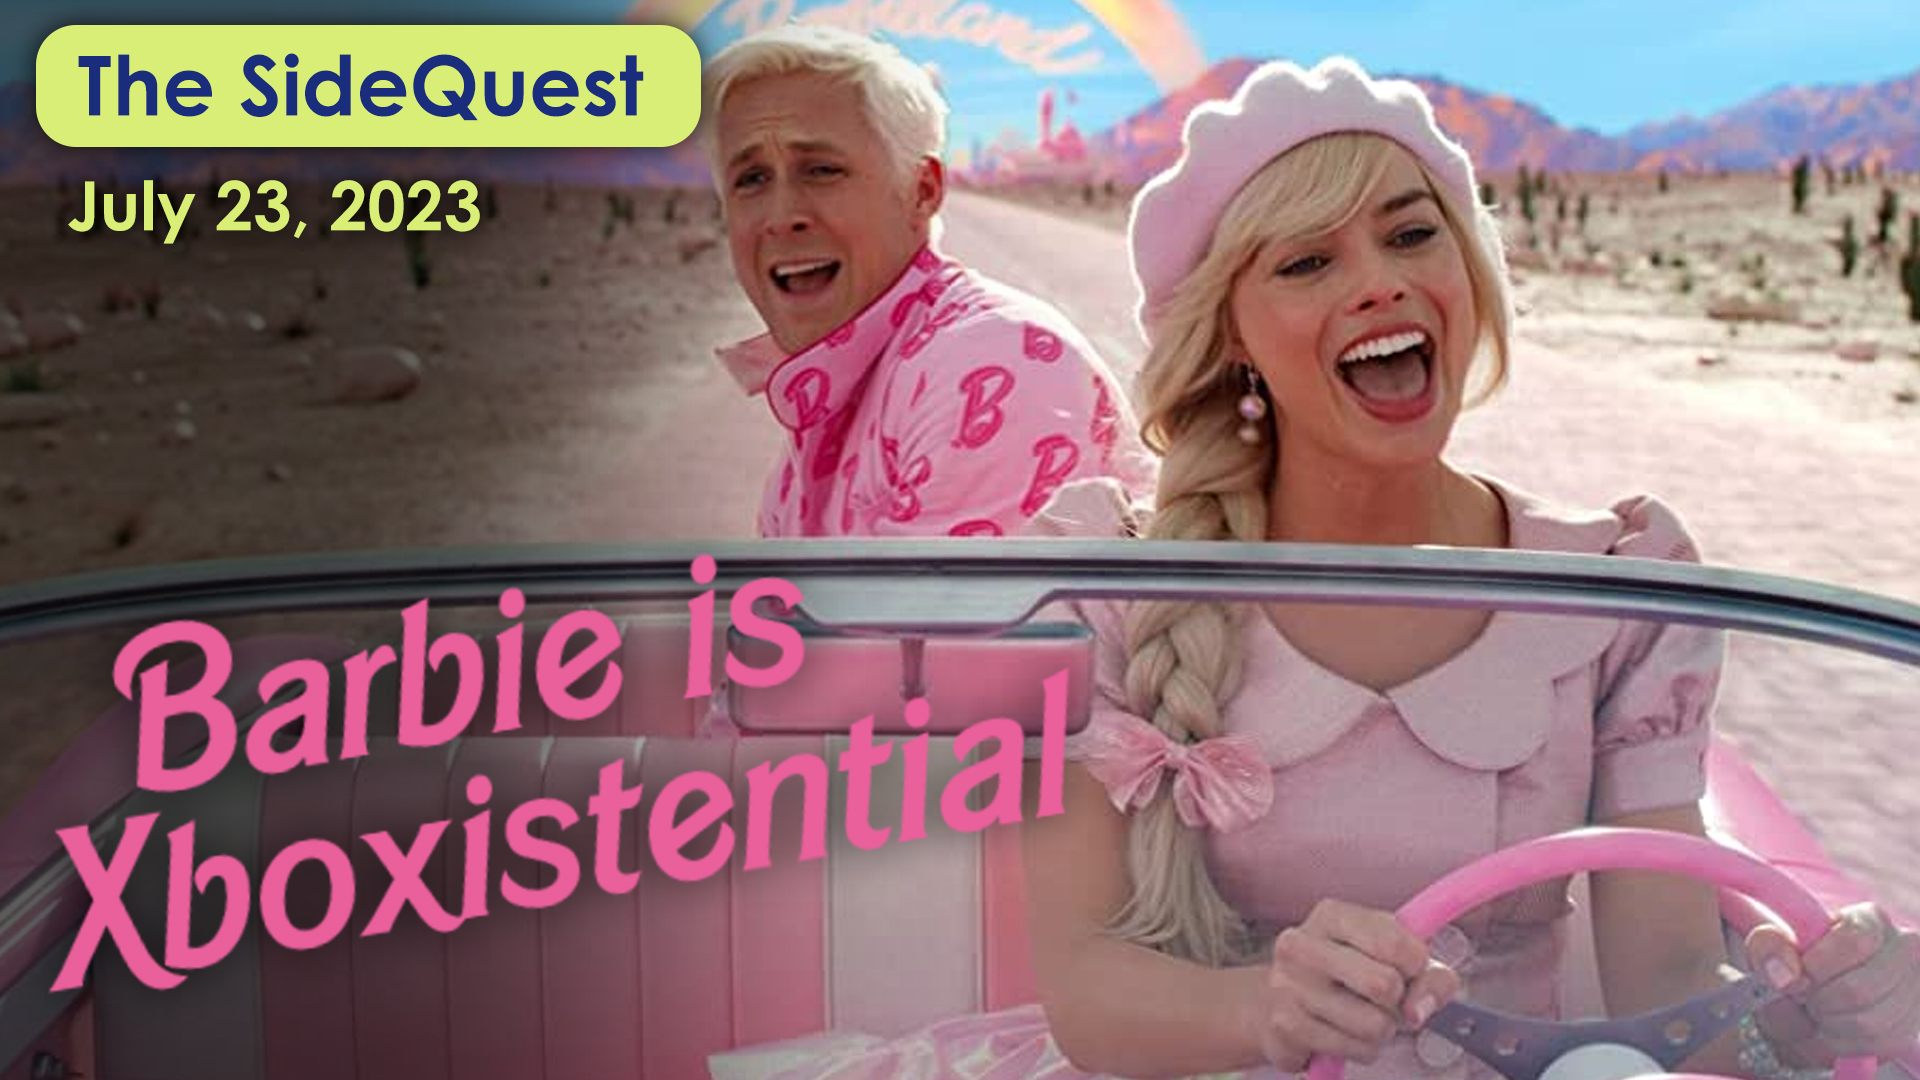 The SideQuest LIVE! July 23, 2023: Barbie is Xboxistential